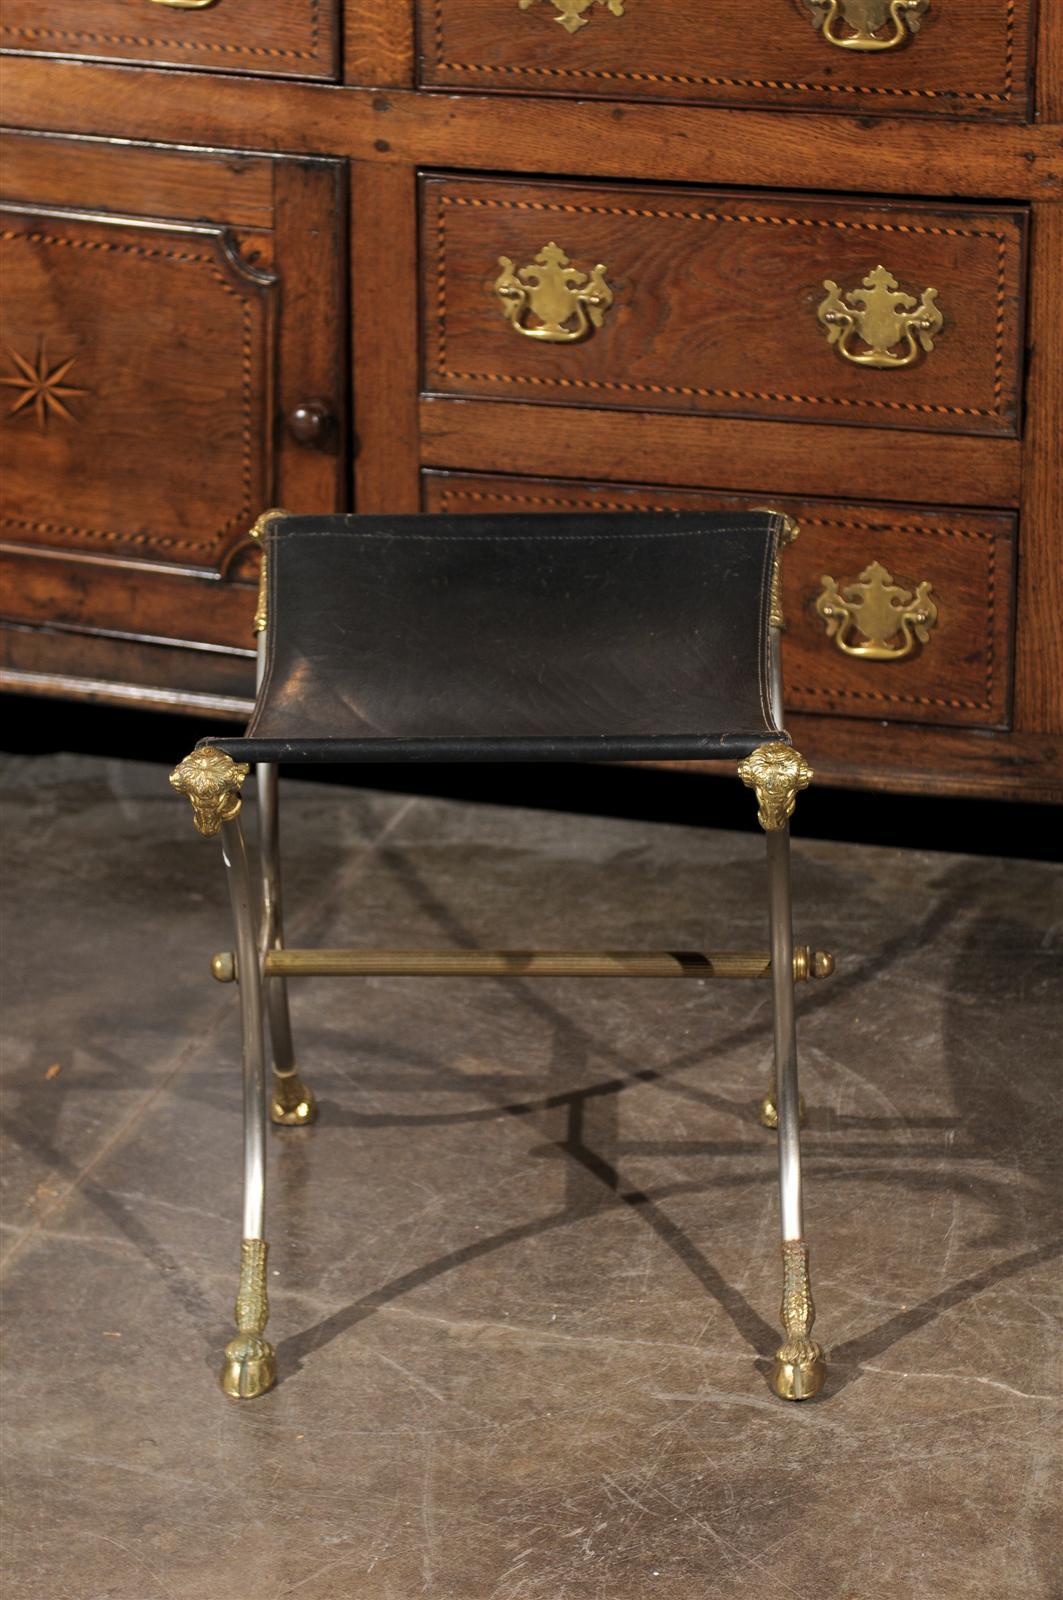 20th Century Italian Directoire Style Steel and Brass Stool with Ram’s Heads and Hoof Feet